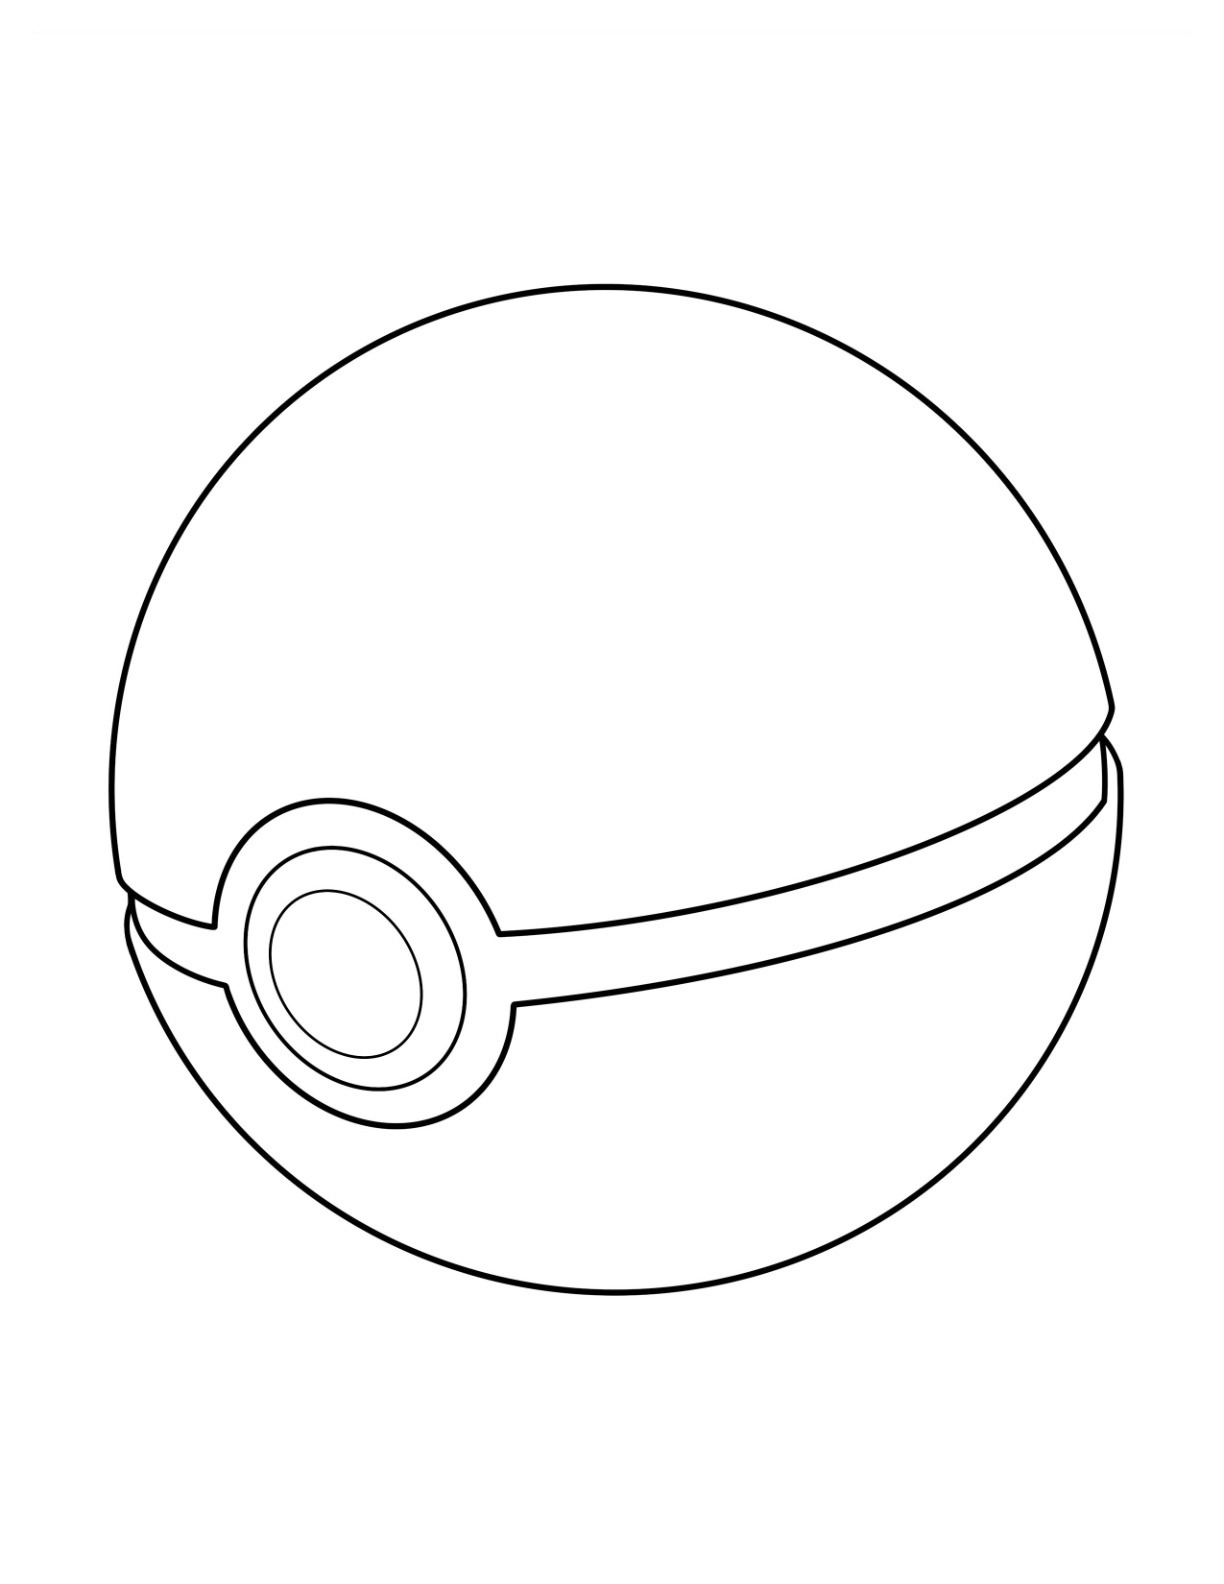 Pokeball coloring pages by coloringpageswk on